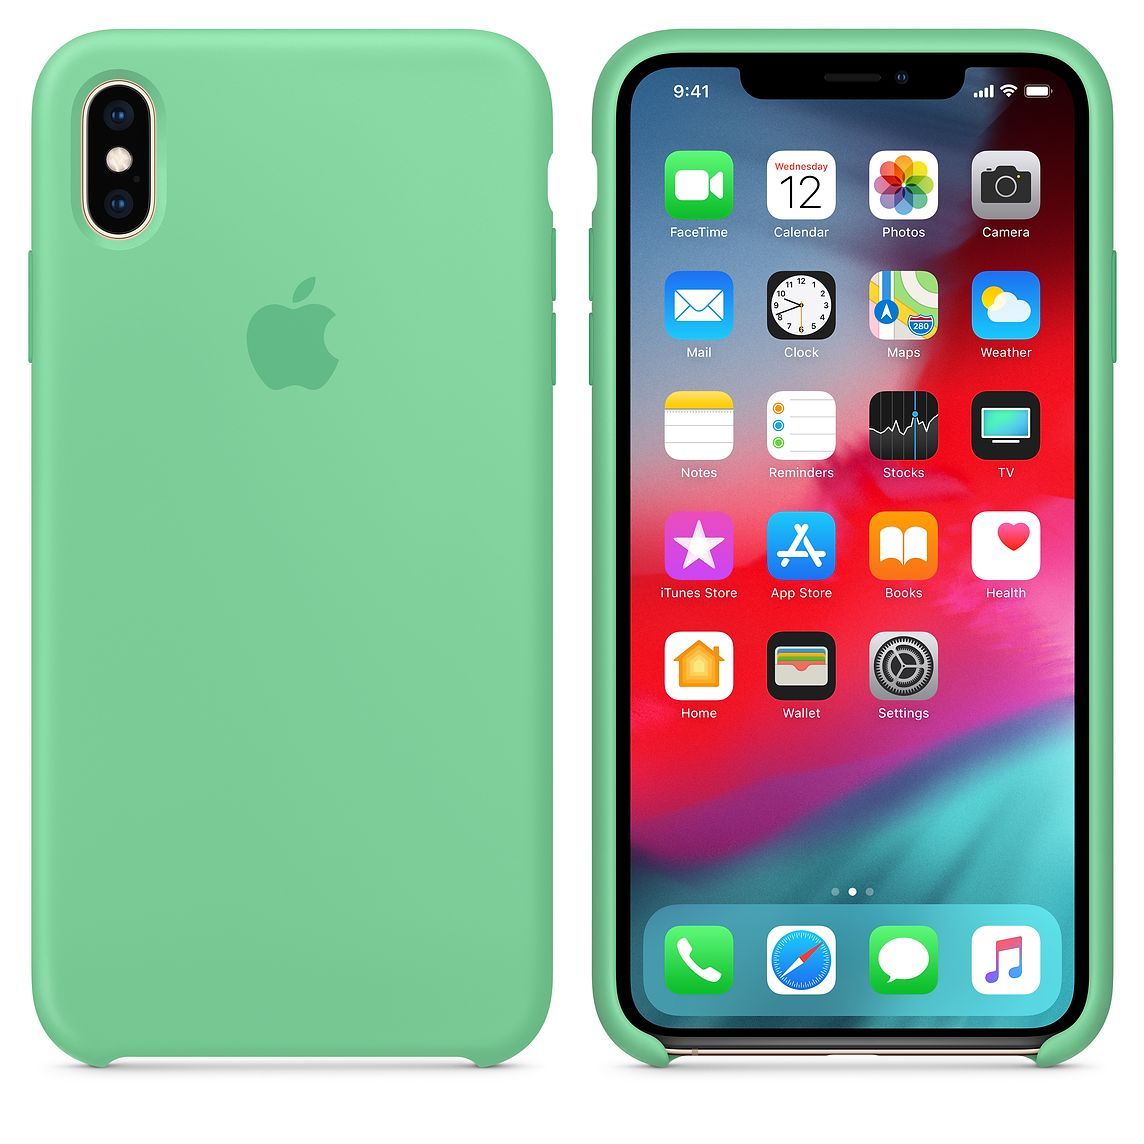 coque iphone xs max menthe